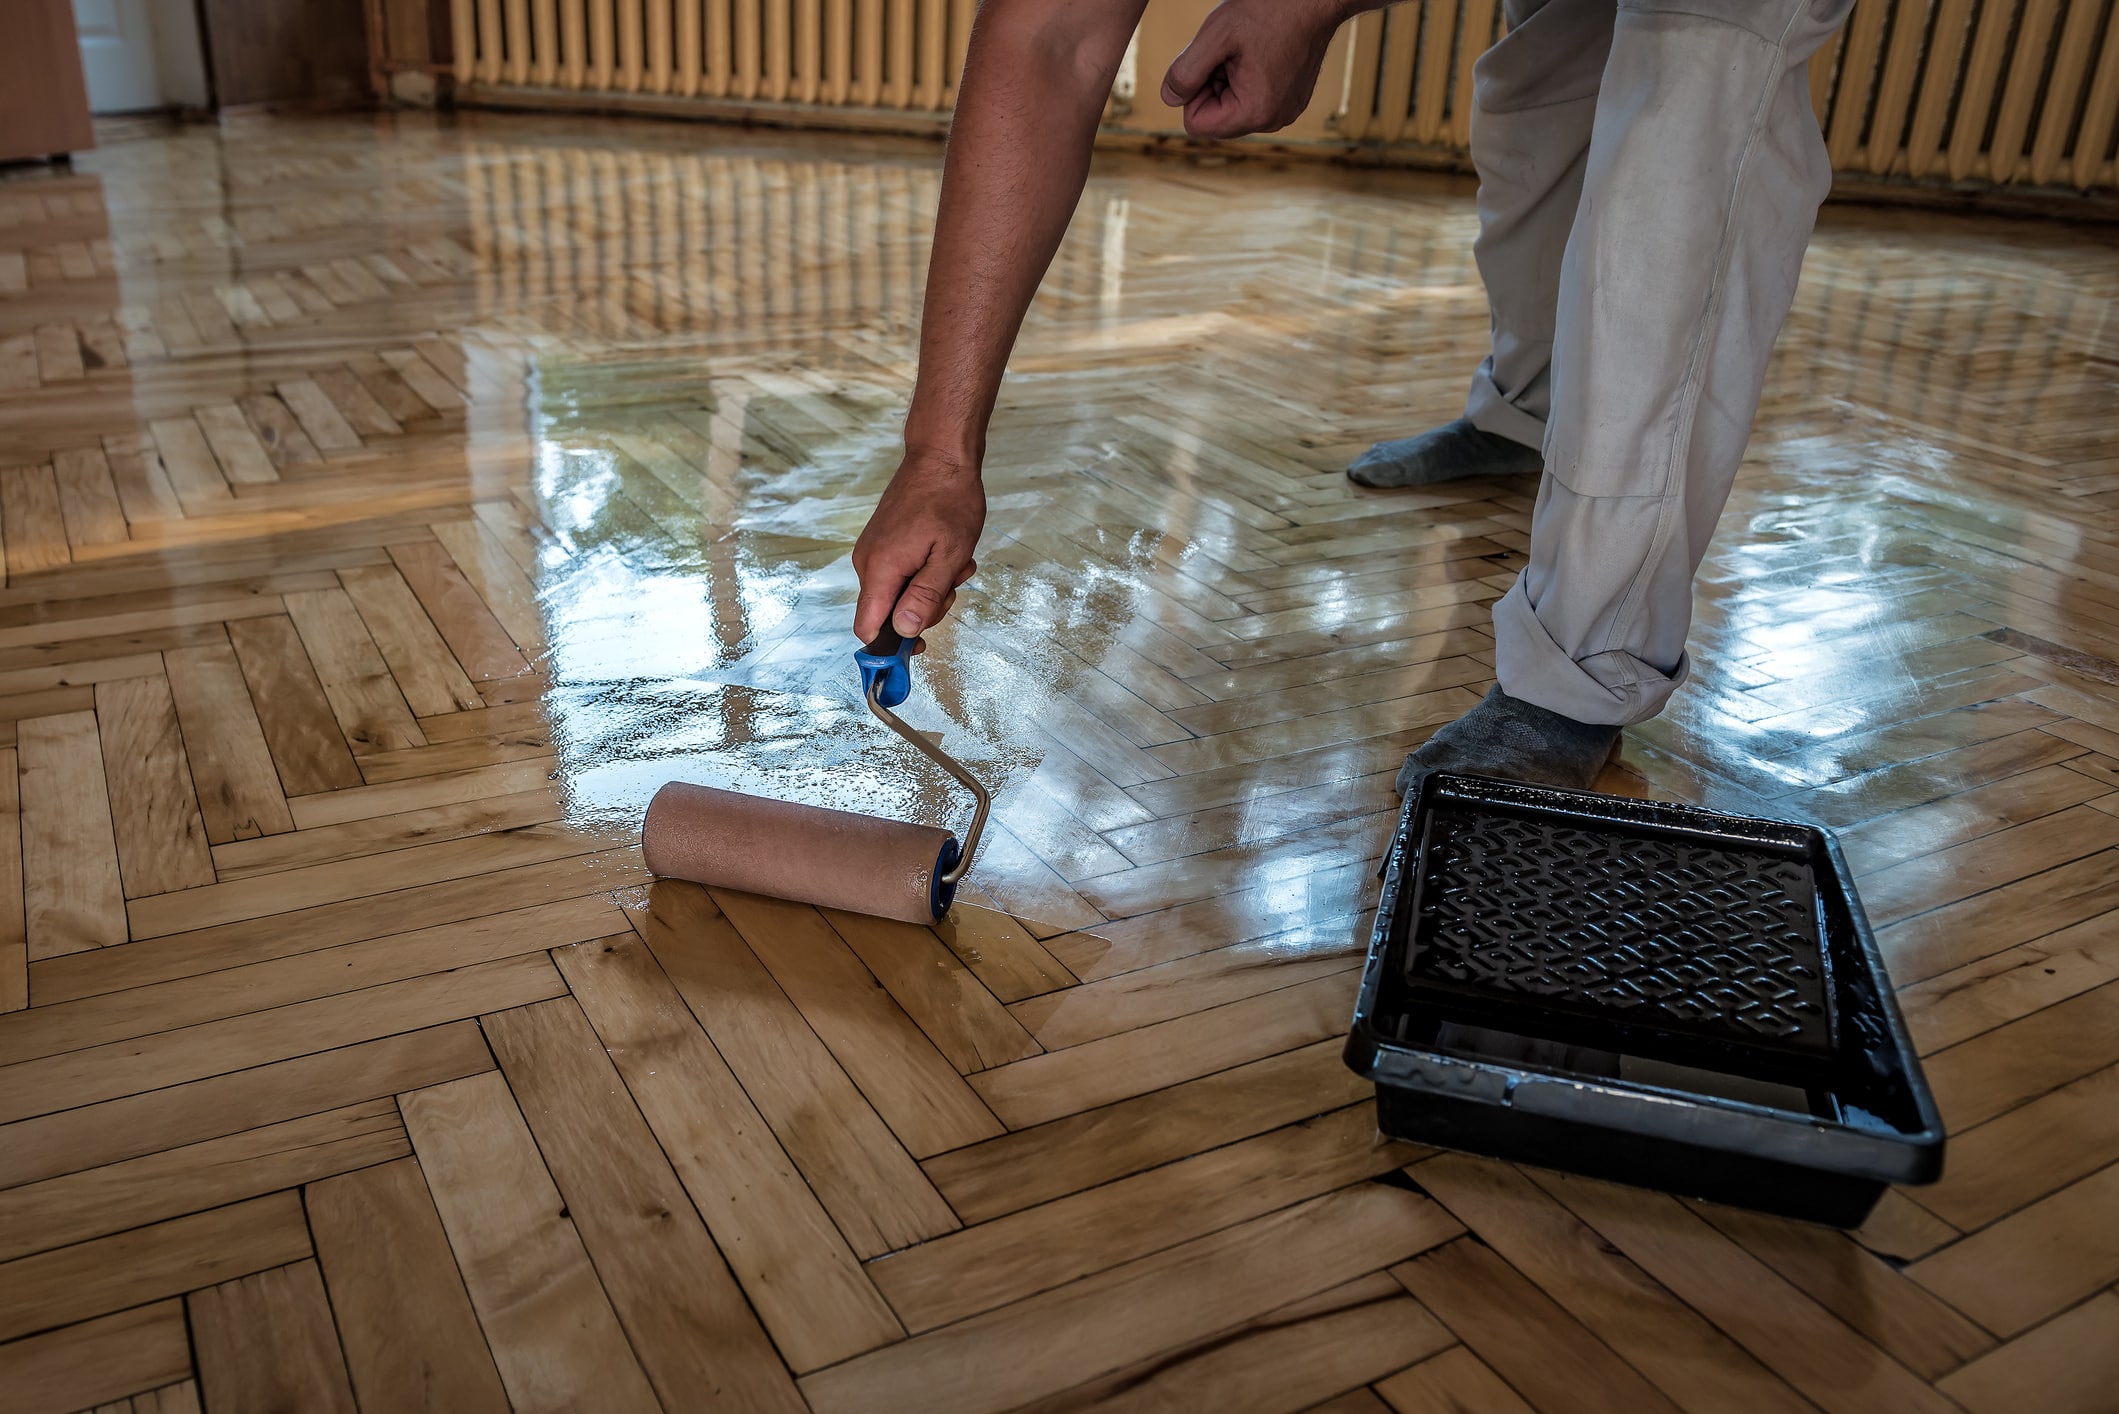 
Lacquering wood floors. Worker uses a roller to coating floors.